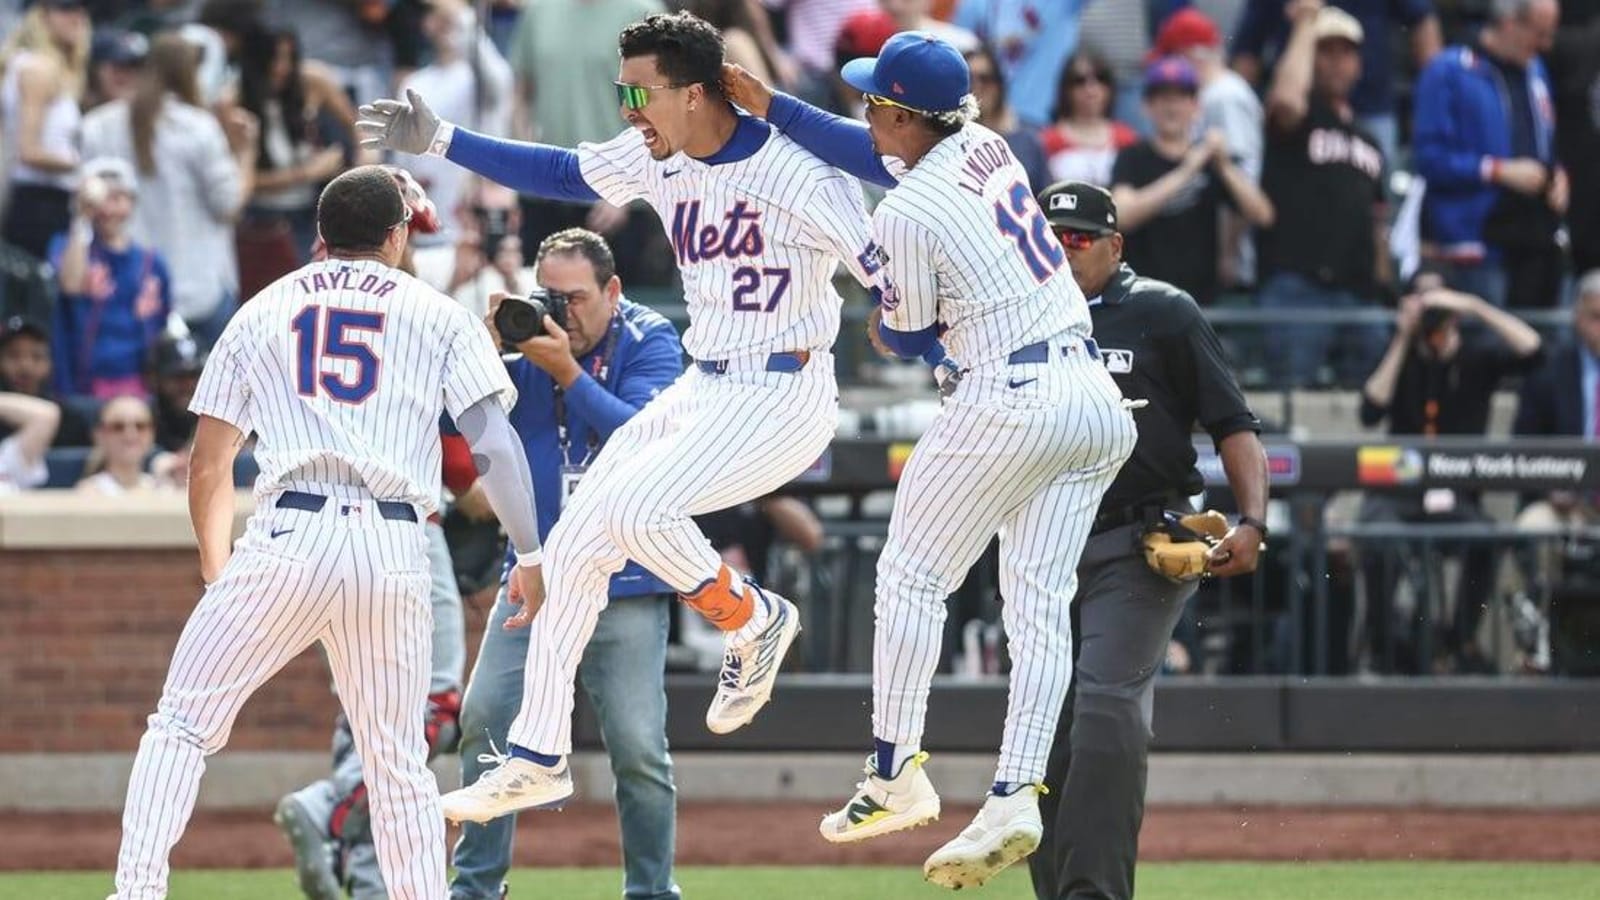 After thrilling comeback win, Mets start series vs. Cubs